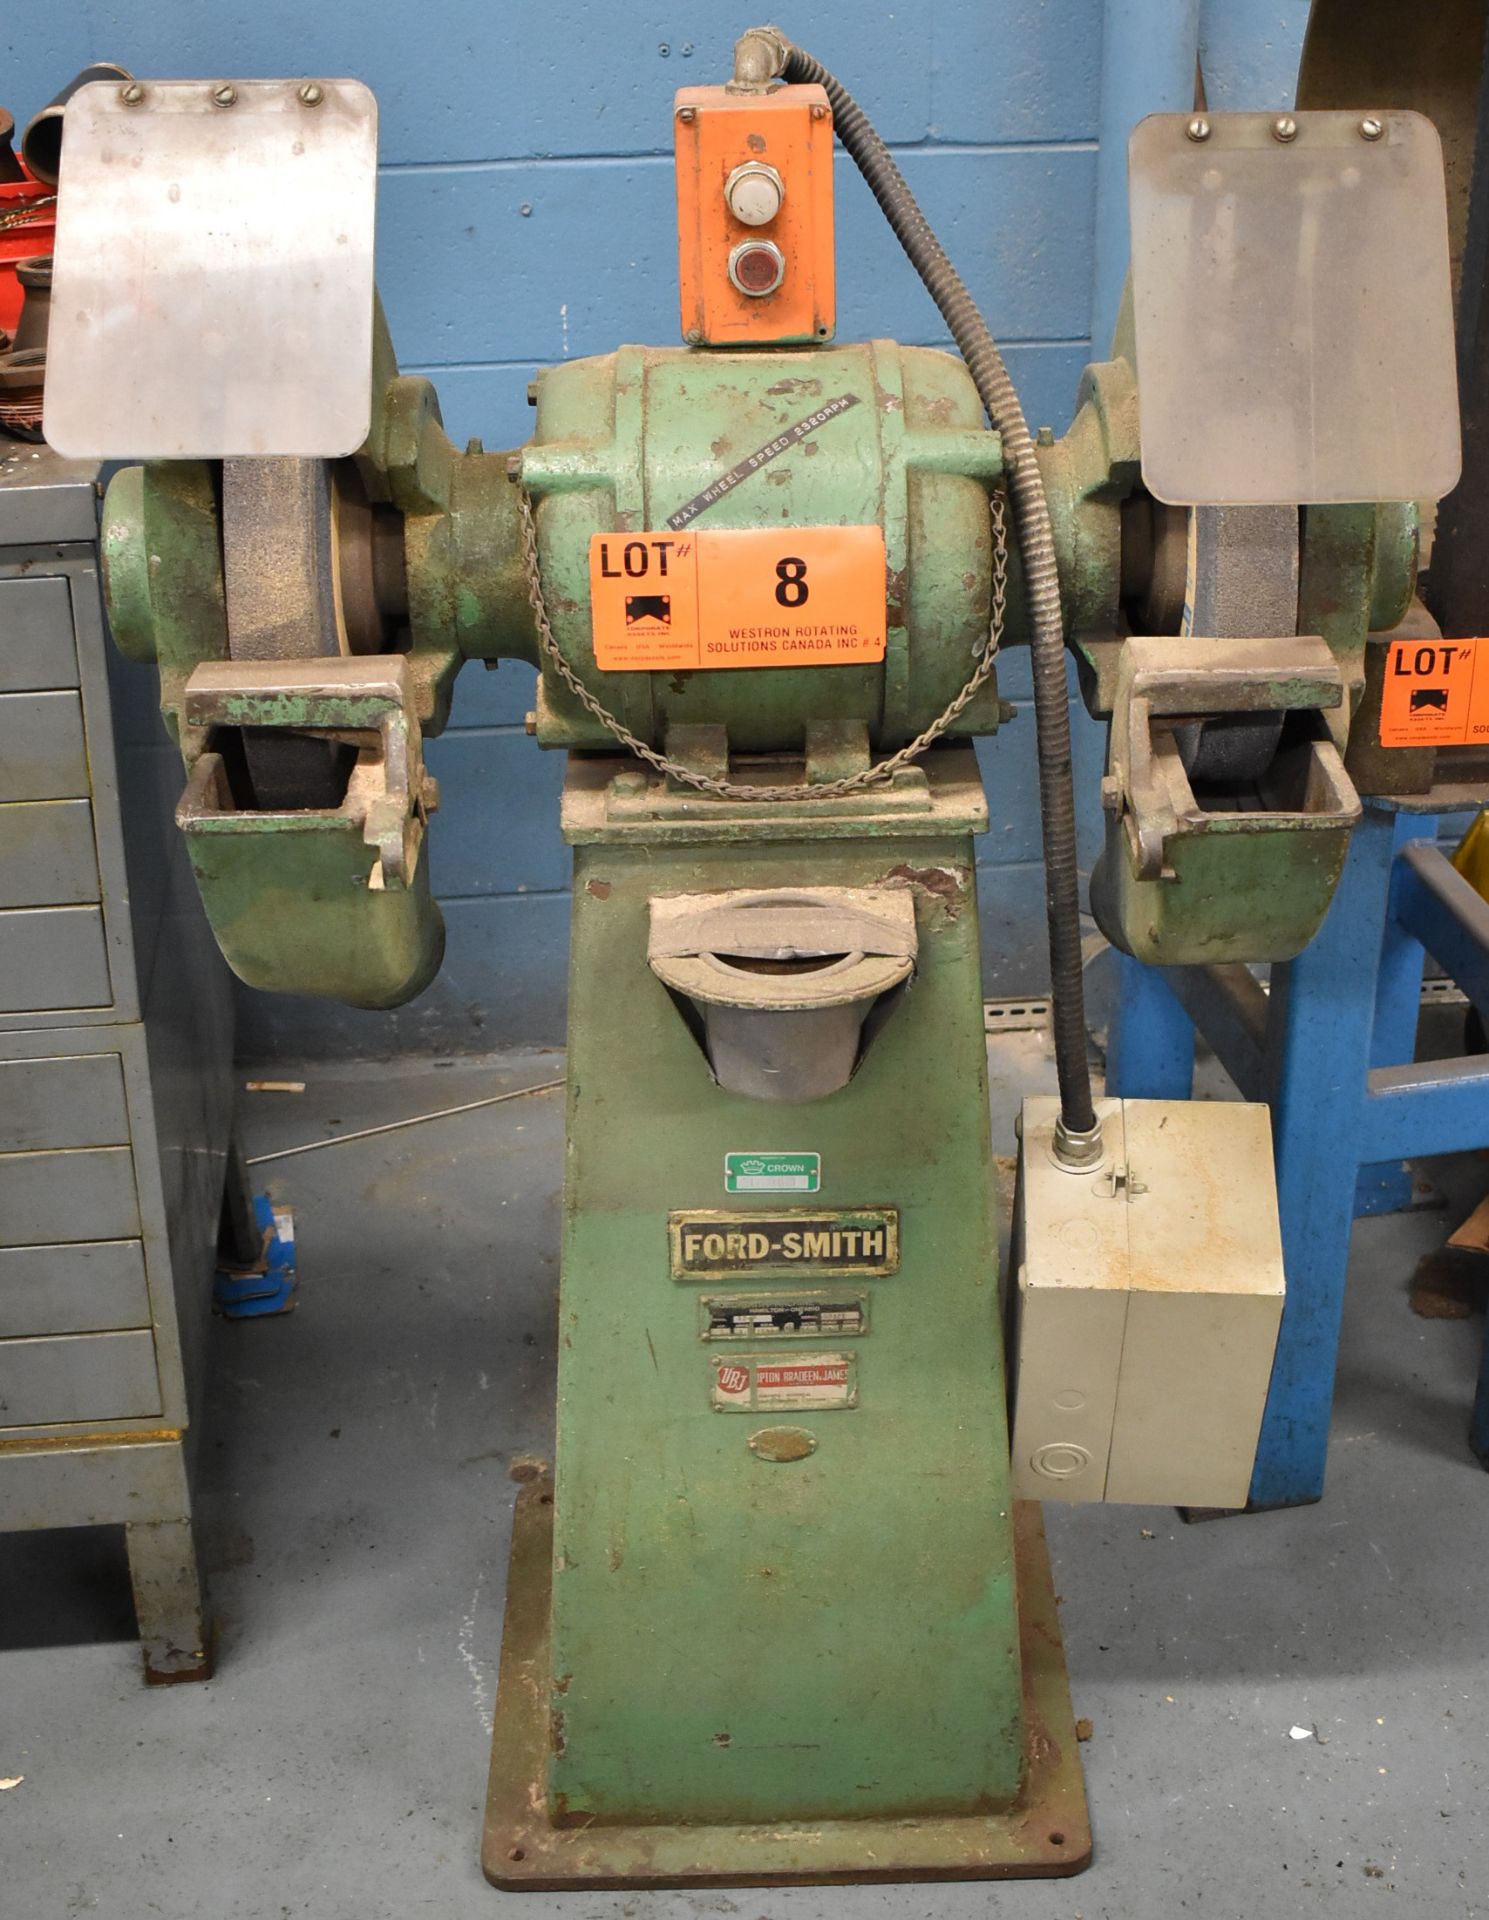 FORD-SMITH 16" DOUBLE END PEDESTAL GRINDER, S/N: 59121 (CI) [RIGGING FEES FOR LOT #8 - $50 CAD